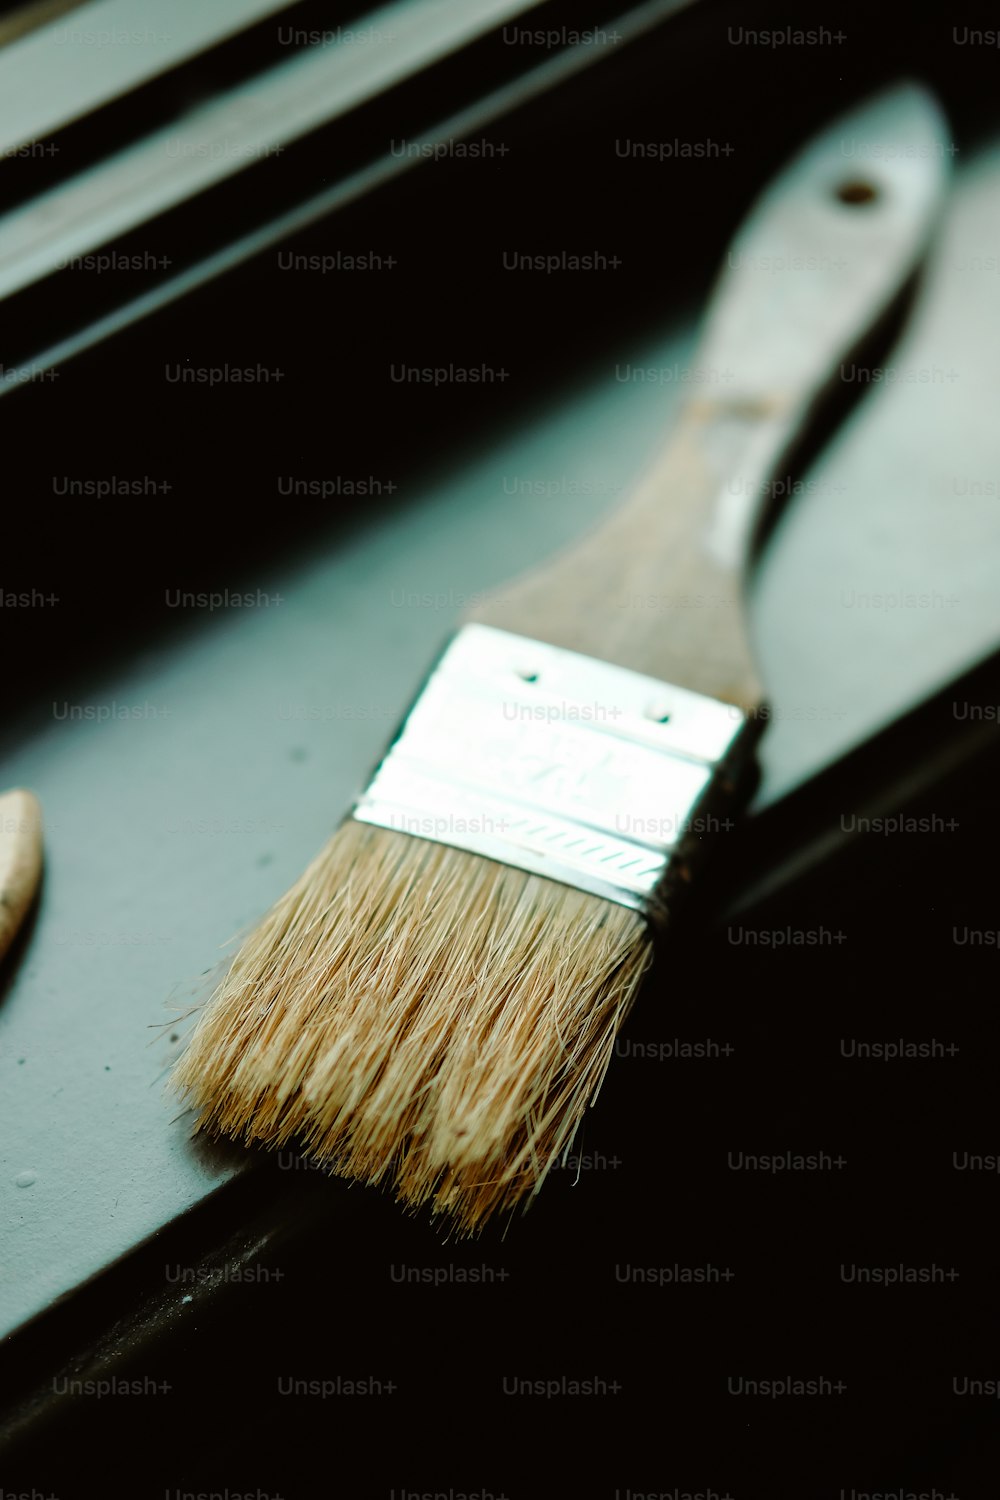 350+ Paint Brush Pictures [HD]  Download Free Images on Unsplash